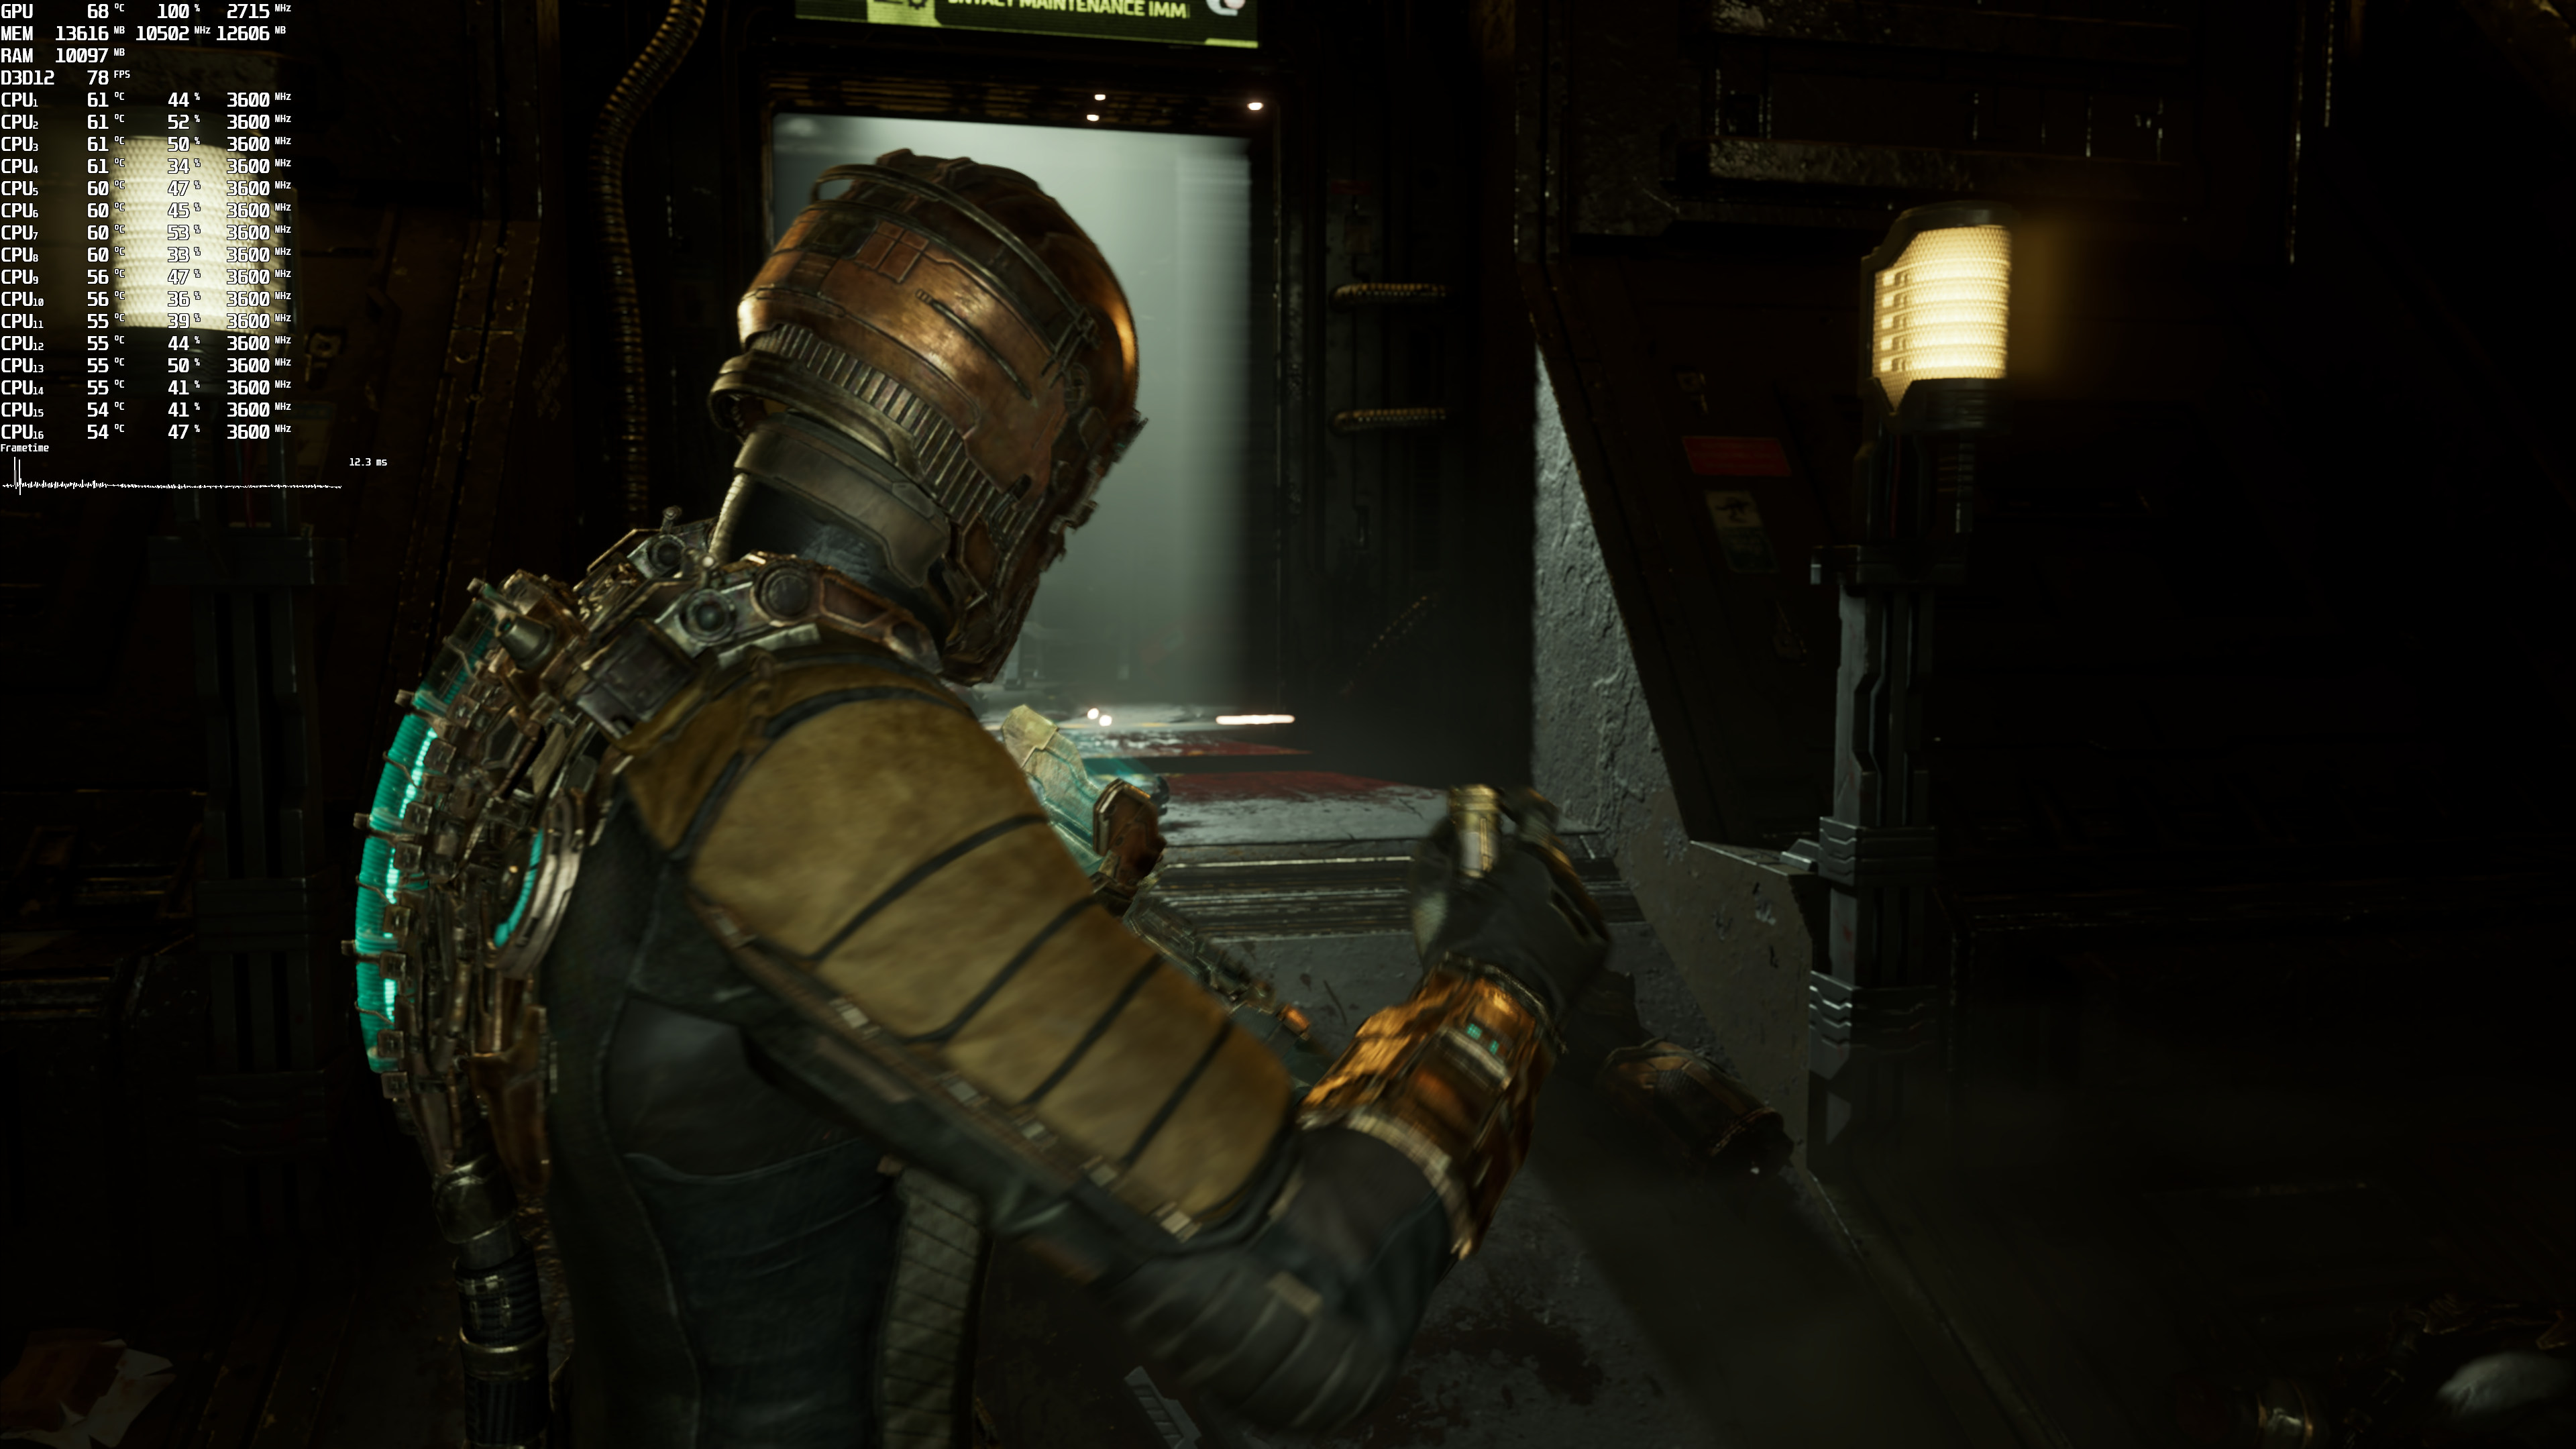 Dead Space PS5 Looks Like a Remarkable Remake